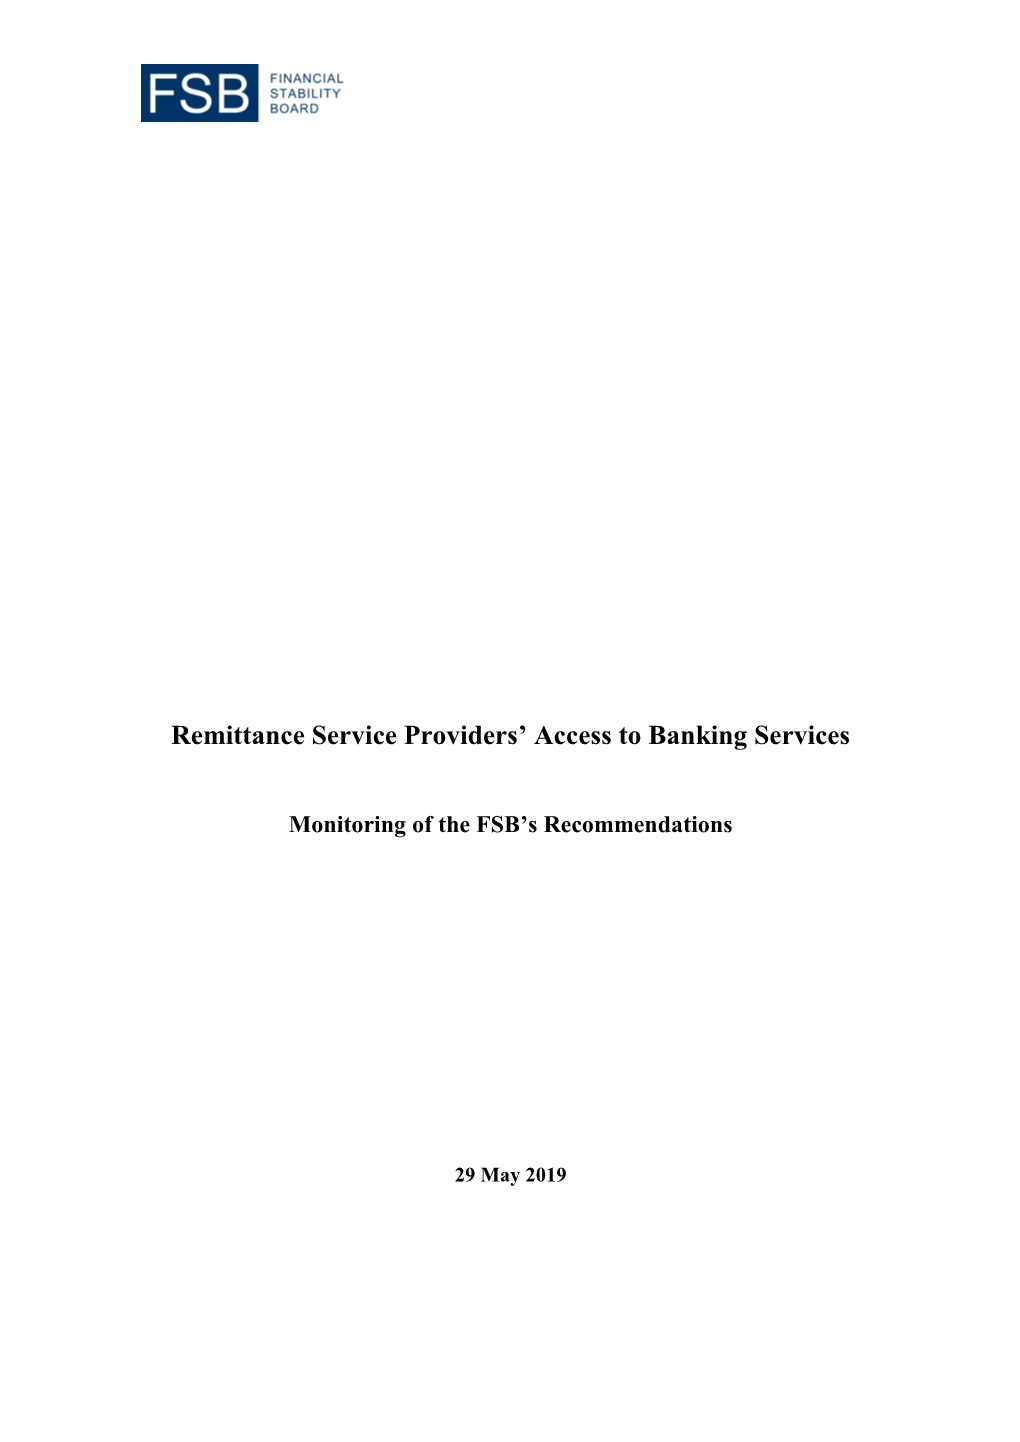 Remittance Service Providers' Access to Banking Services: Monitoring of the FSB's Recommendations